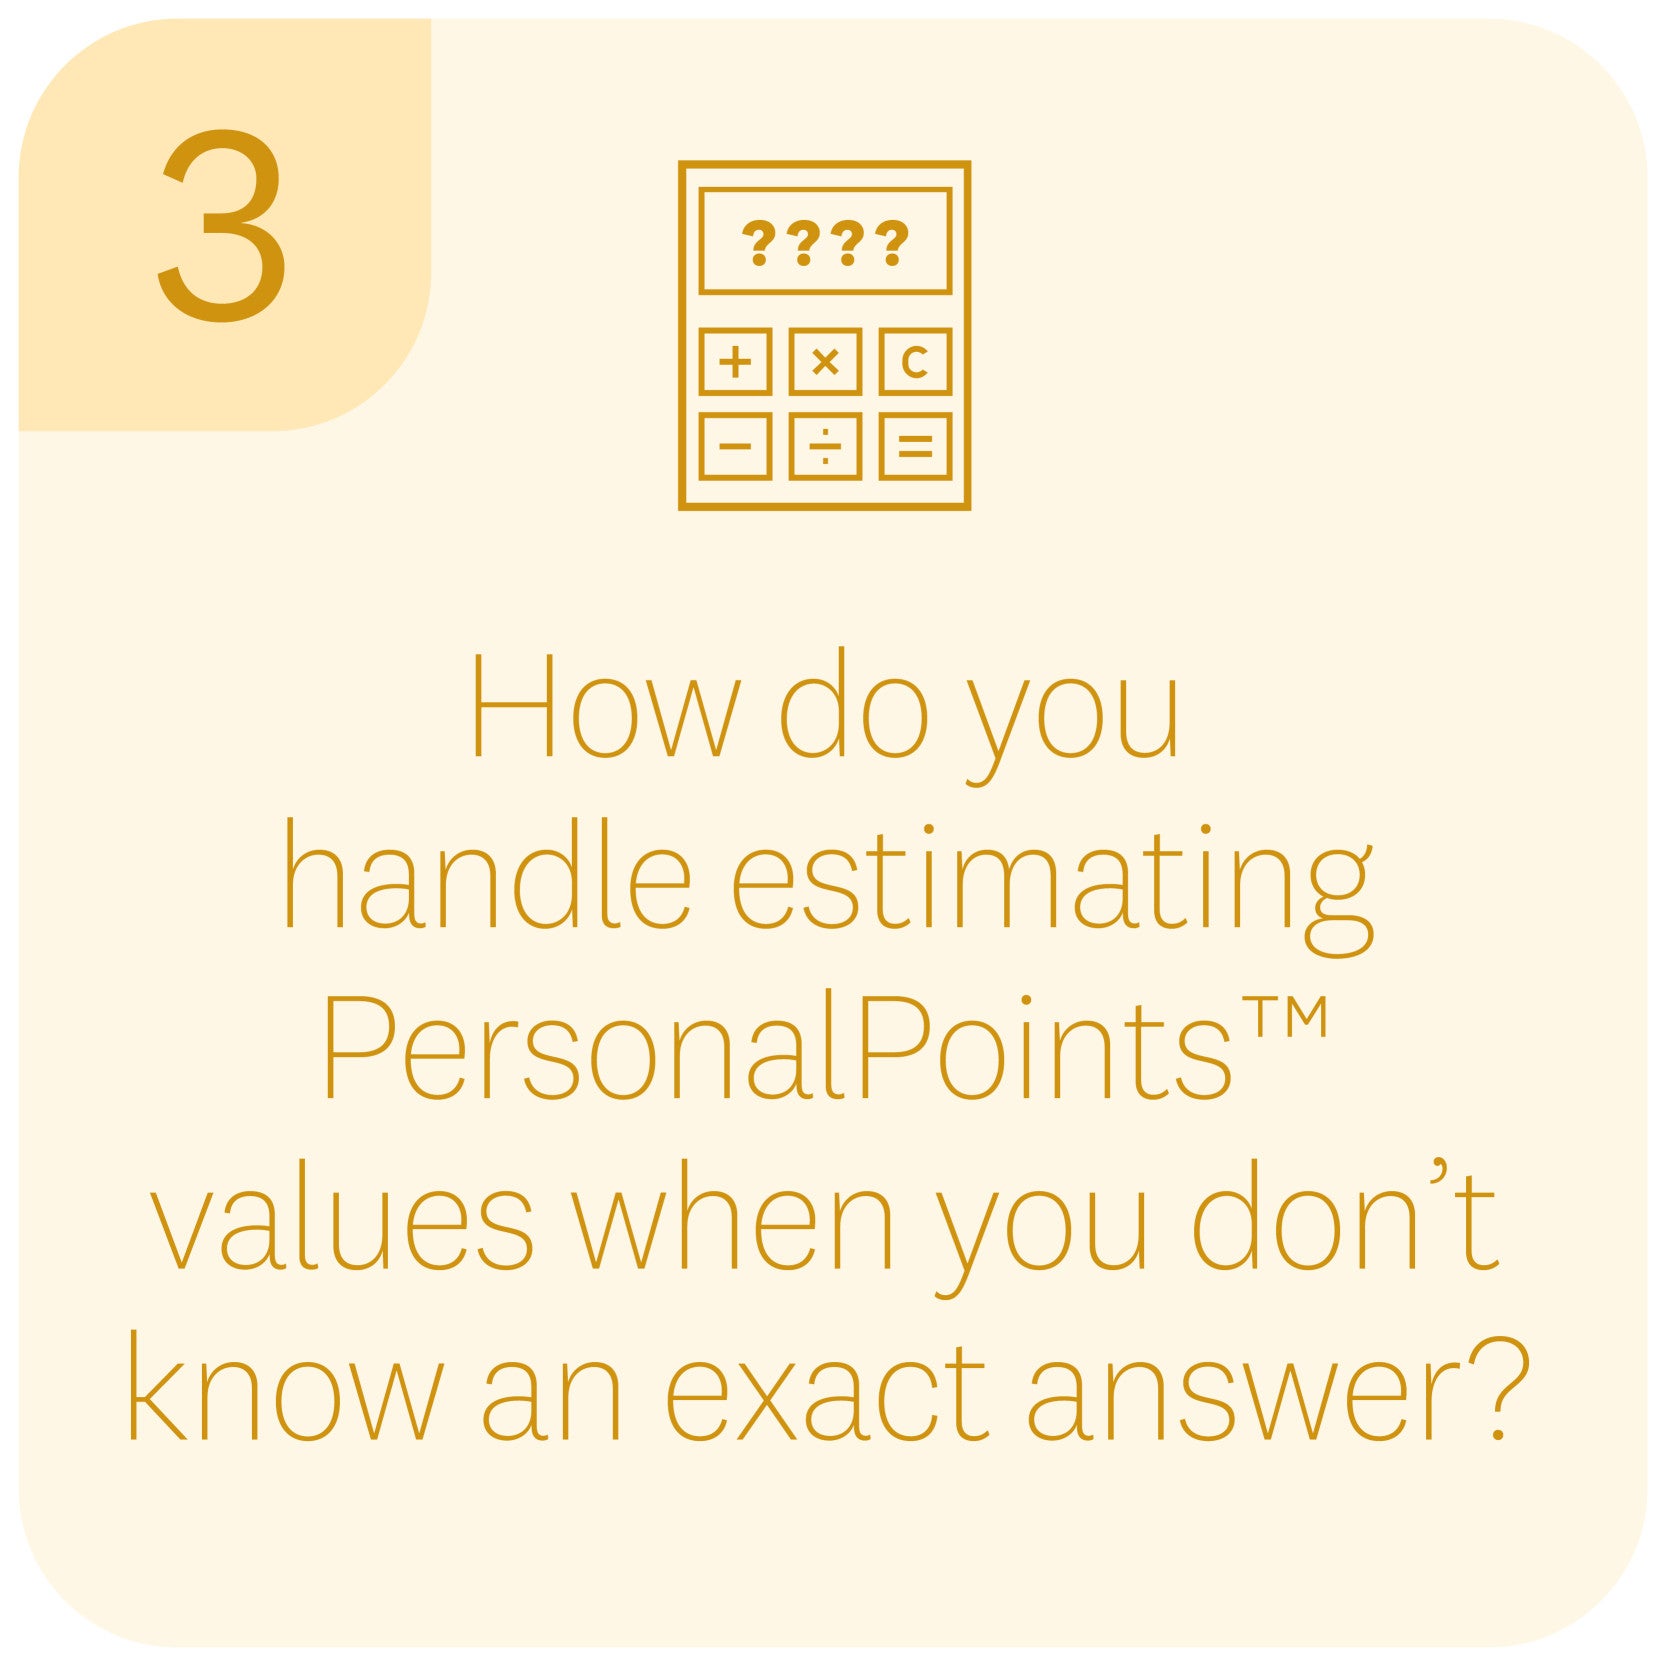 3. How do you handle estimating SmartPoints® values when you don’t know an exact answer? 4. Do you ever save your meals in the WW app for quicker tracking or do you tend to start from scratch each time?